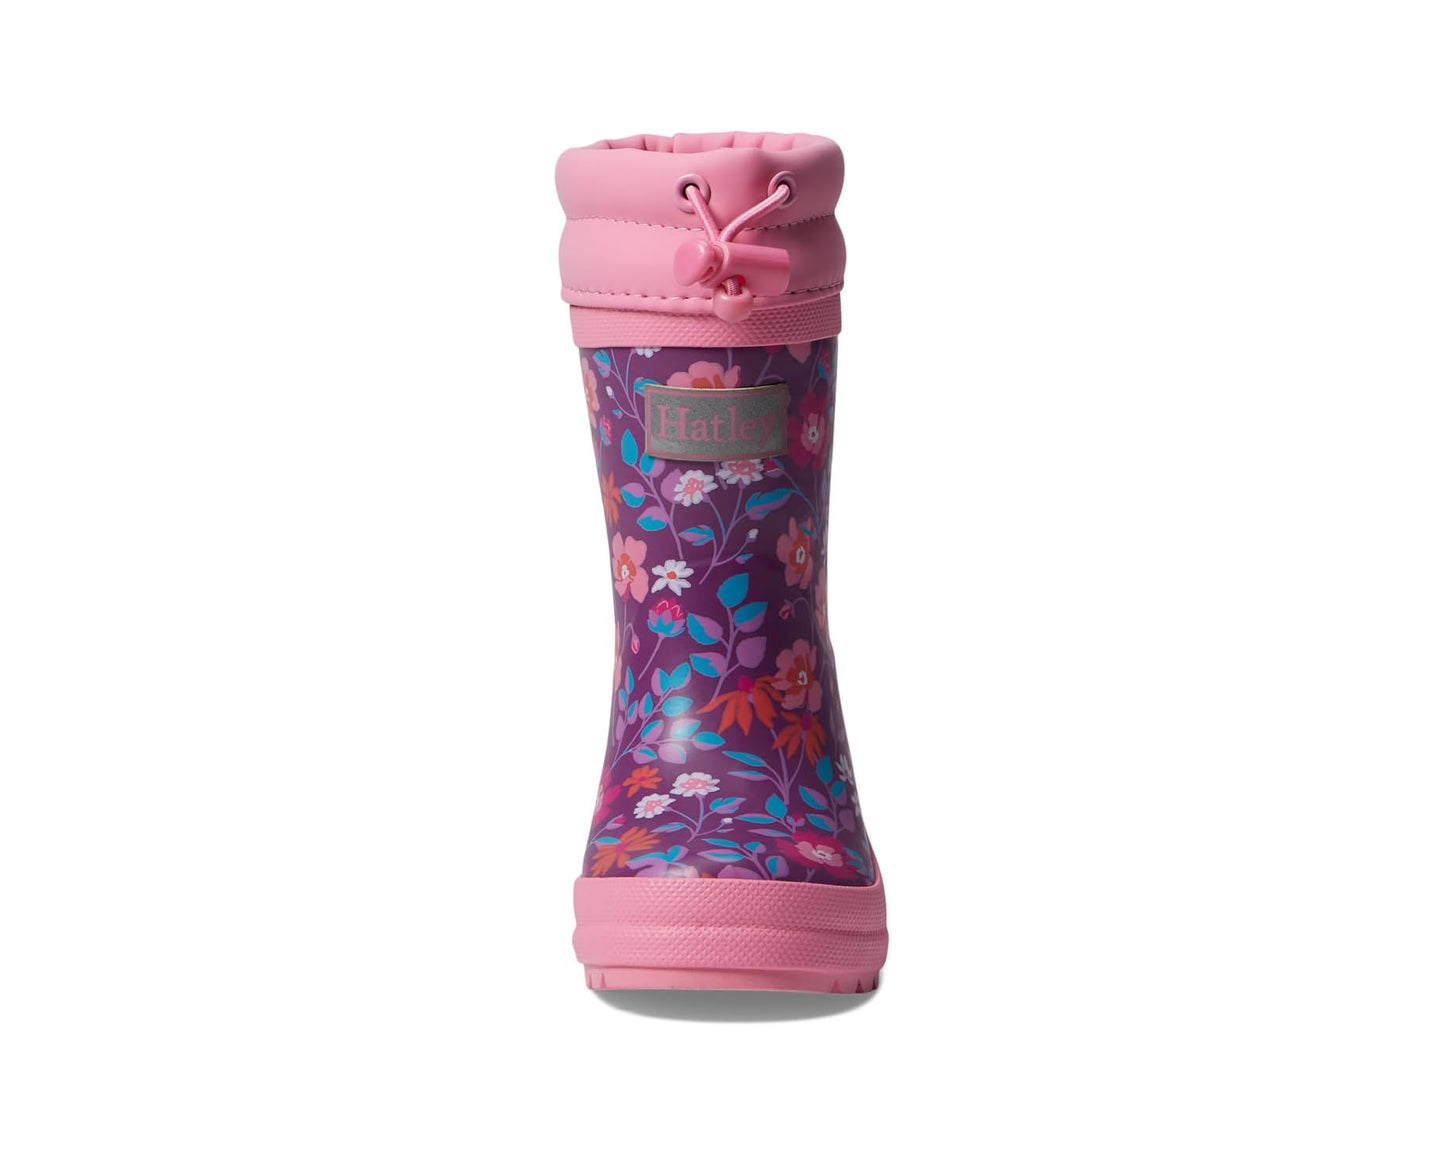 Rainboots with Matching Socks - Wildflowers (Sherpa Lined)